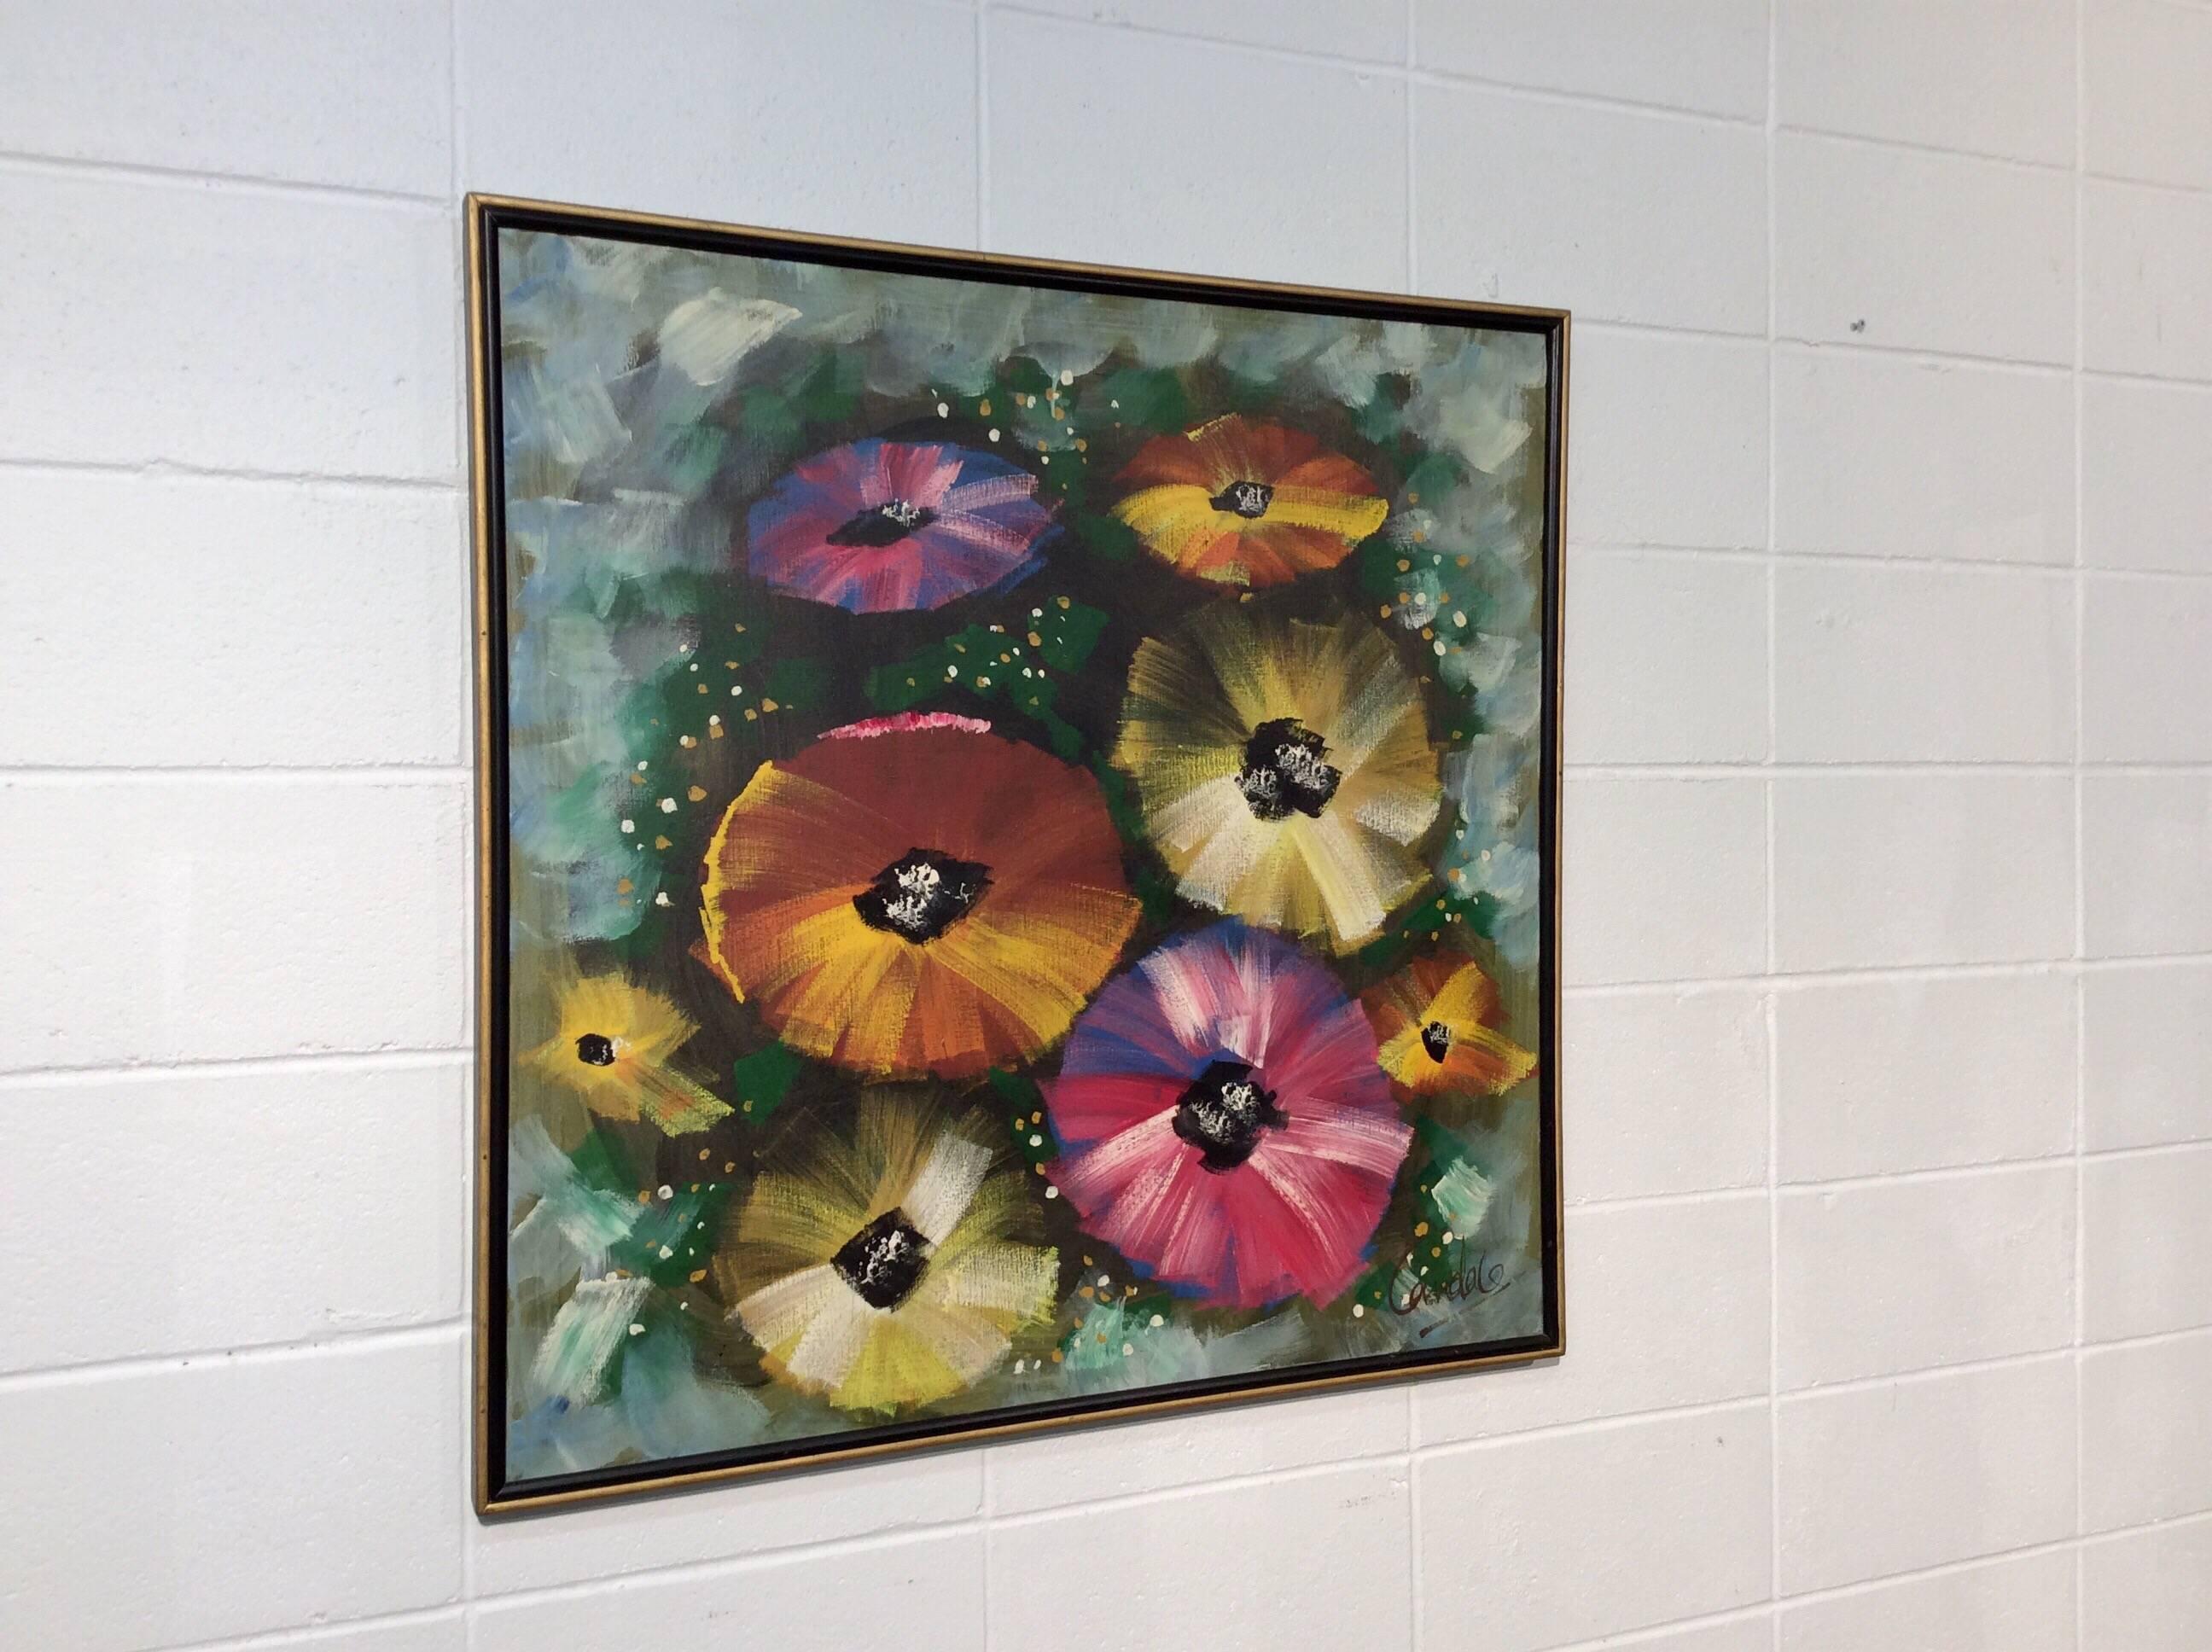 Mid-Century Modern Midcentury Abstract Art on Canvas Depicting Pansies